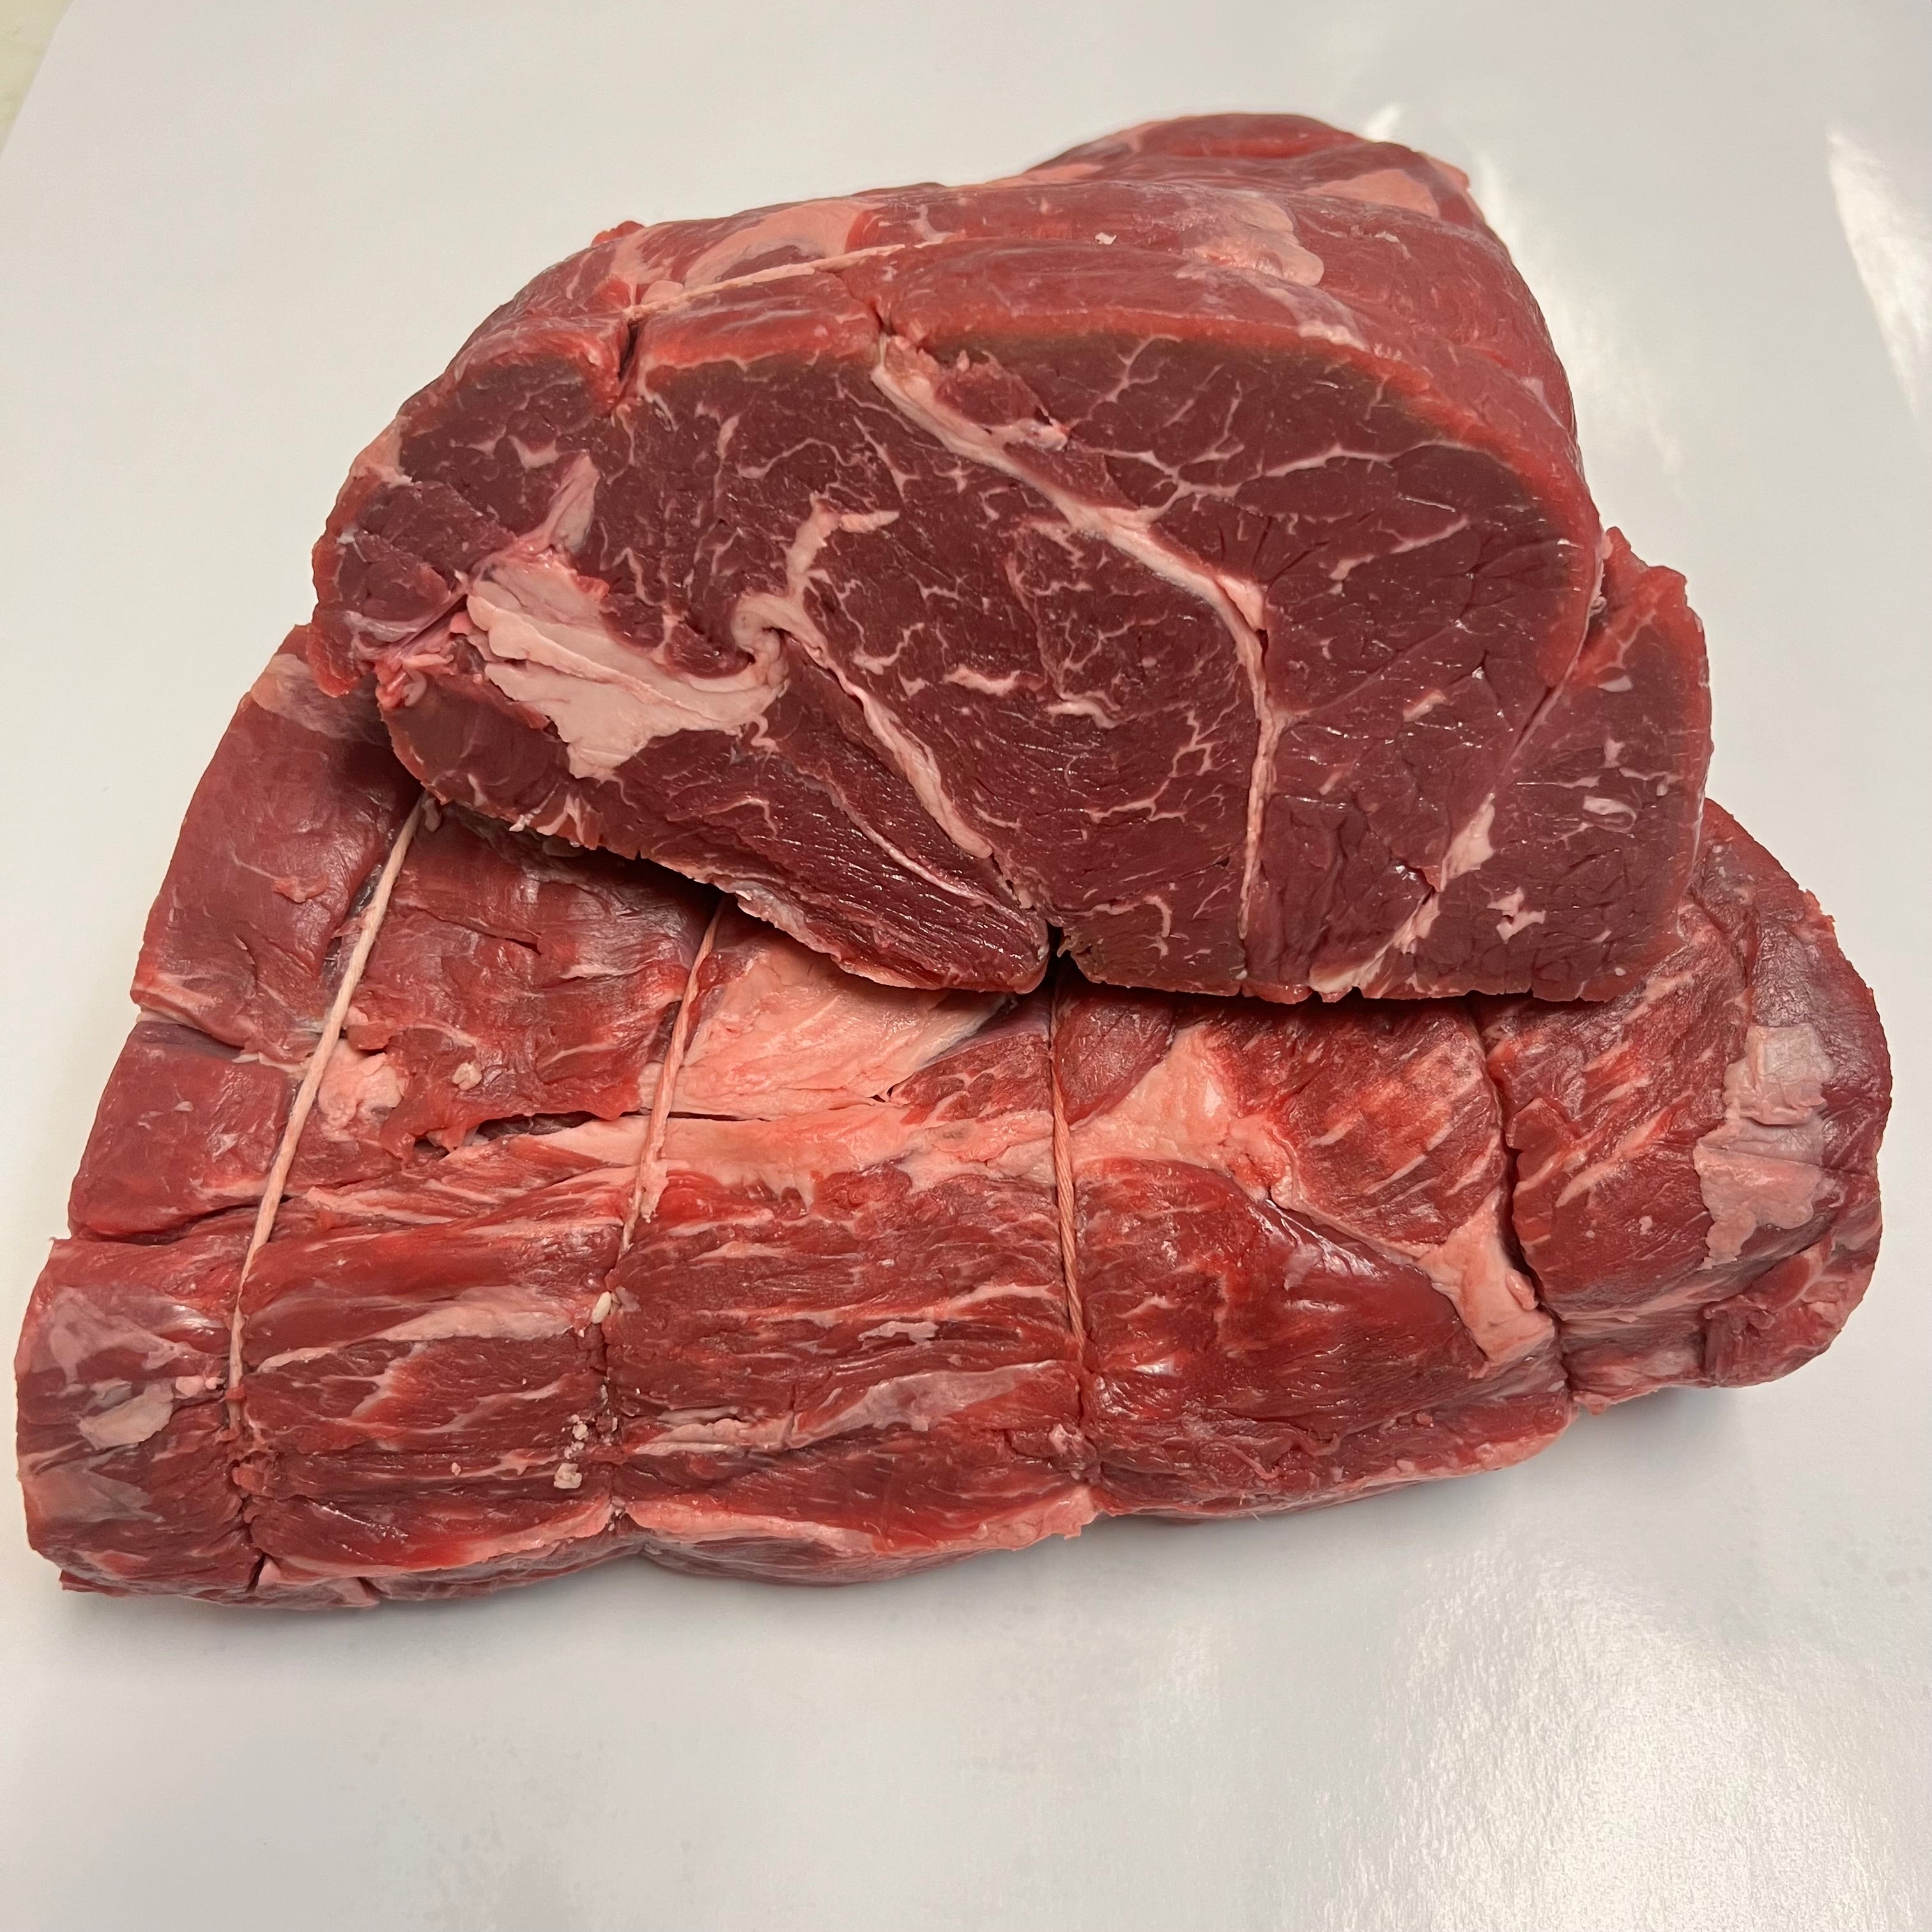 Prime Chuck Roast (Bone in or Boneless) Sold By the Pound